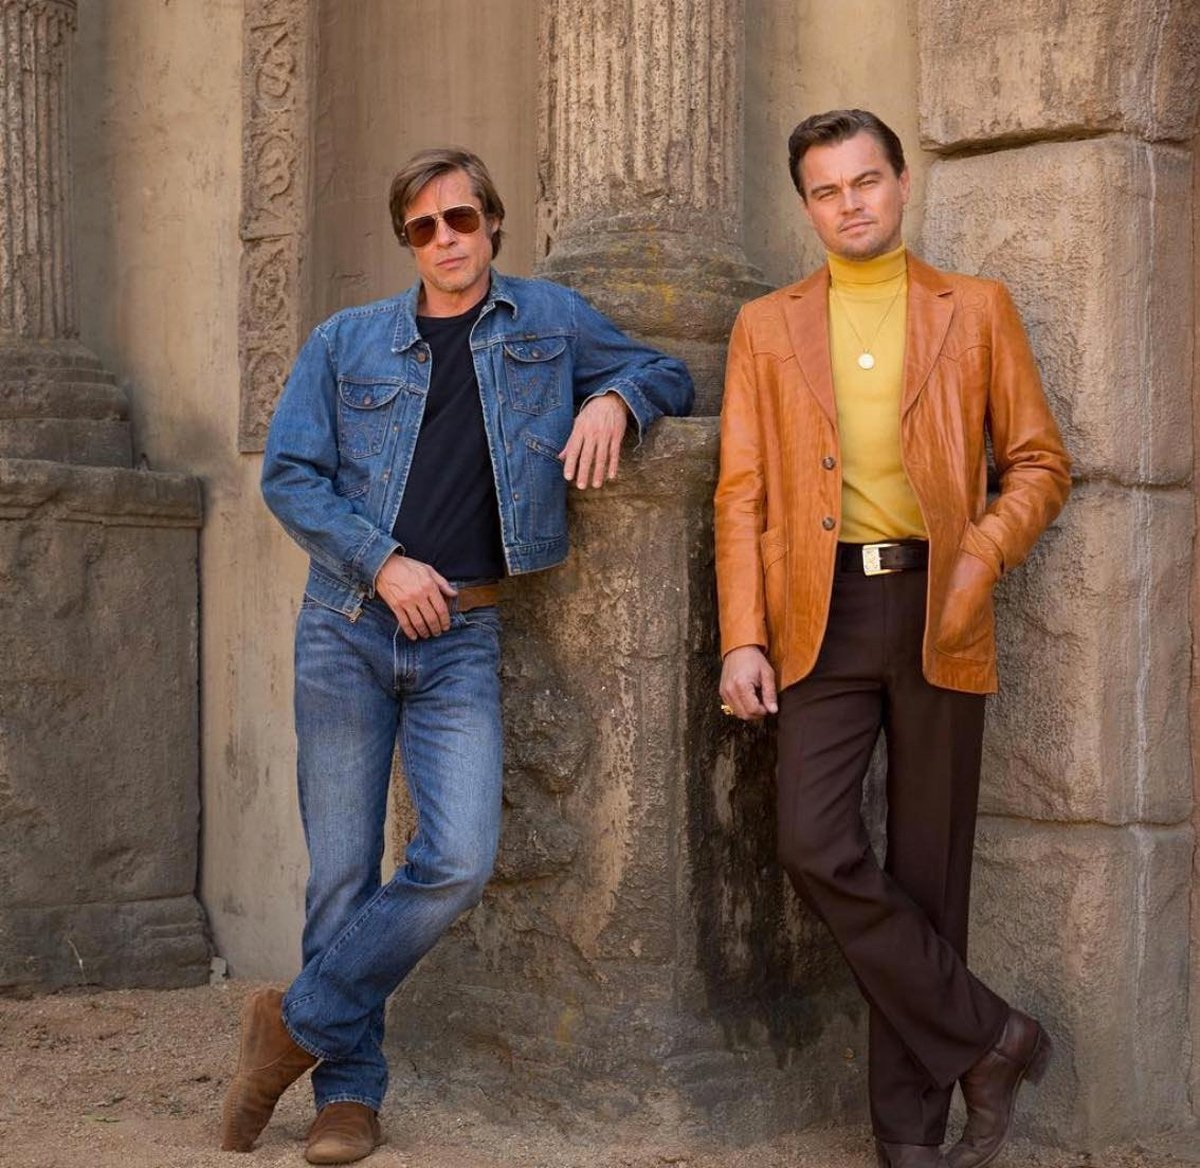 YAKINDA: ONCE UPON A TİME İN HOLLYWOOD